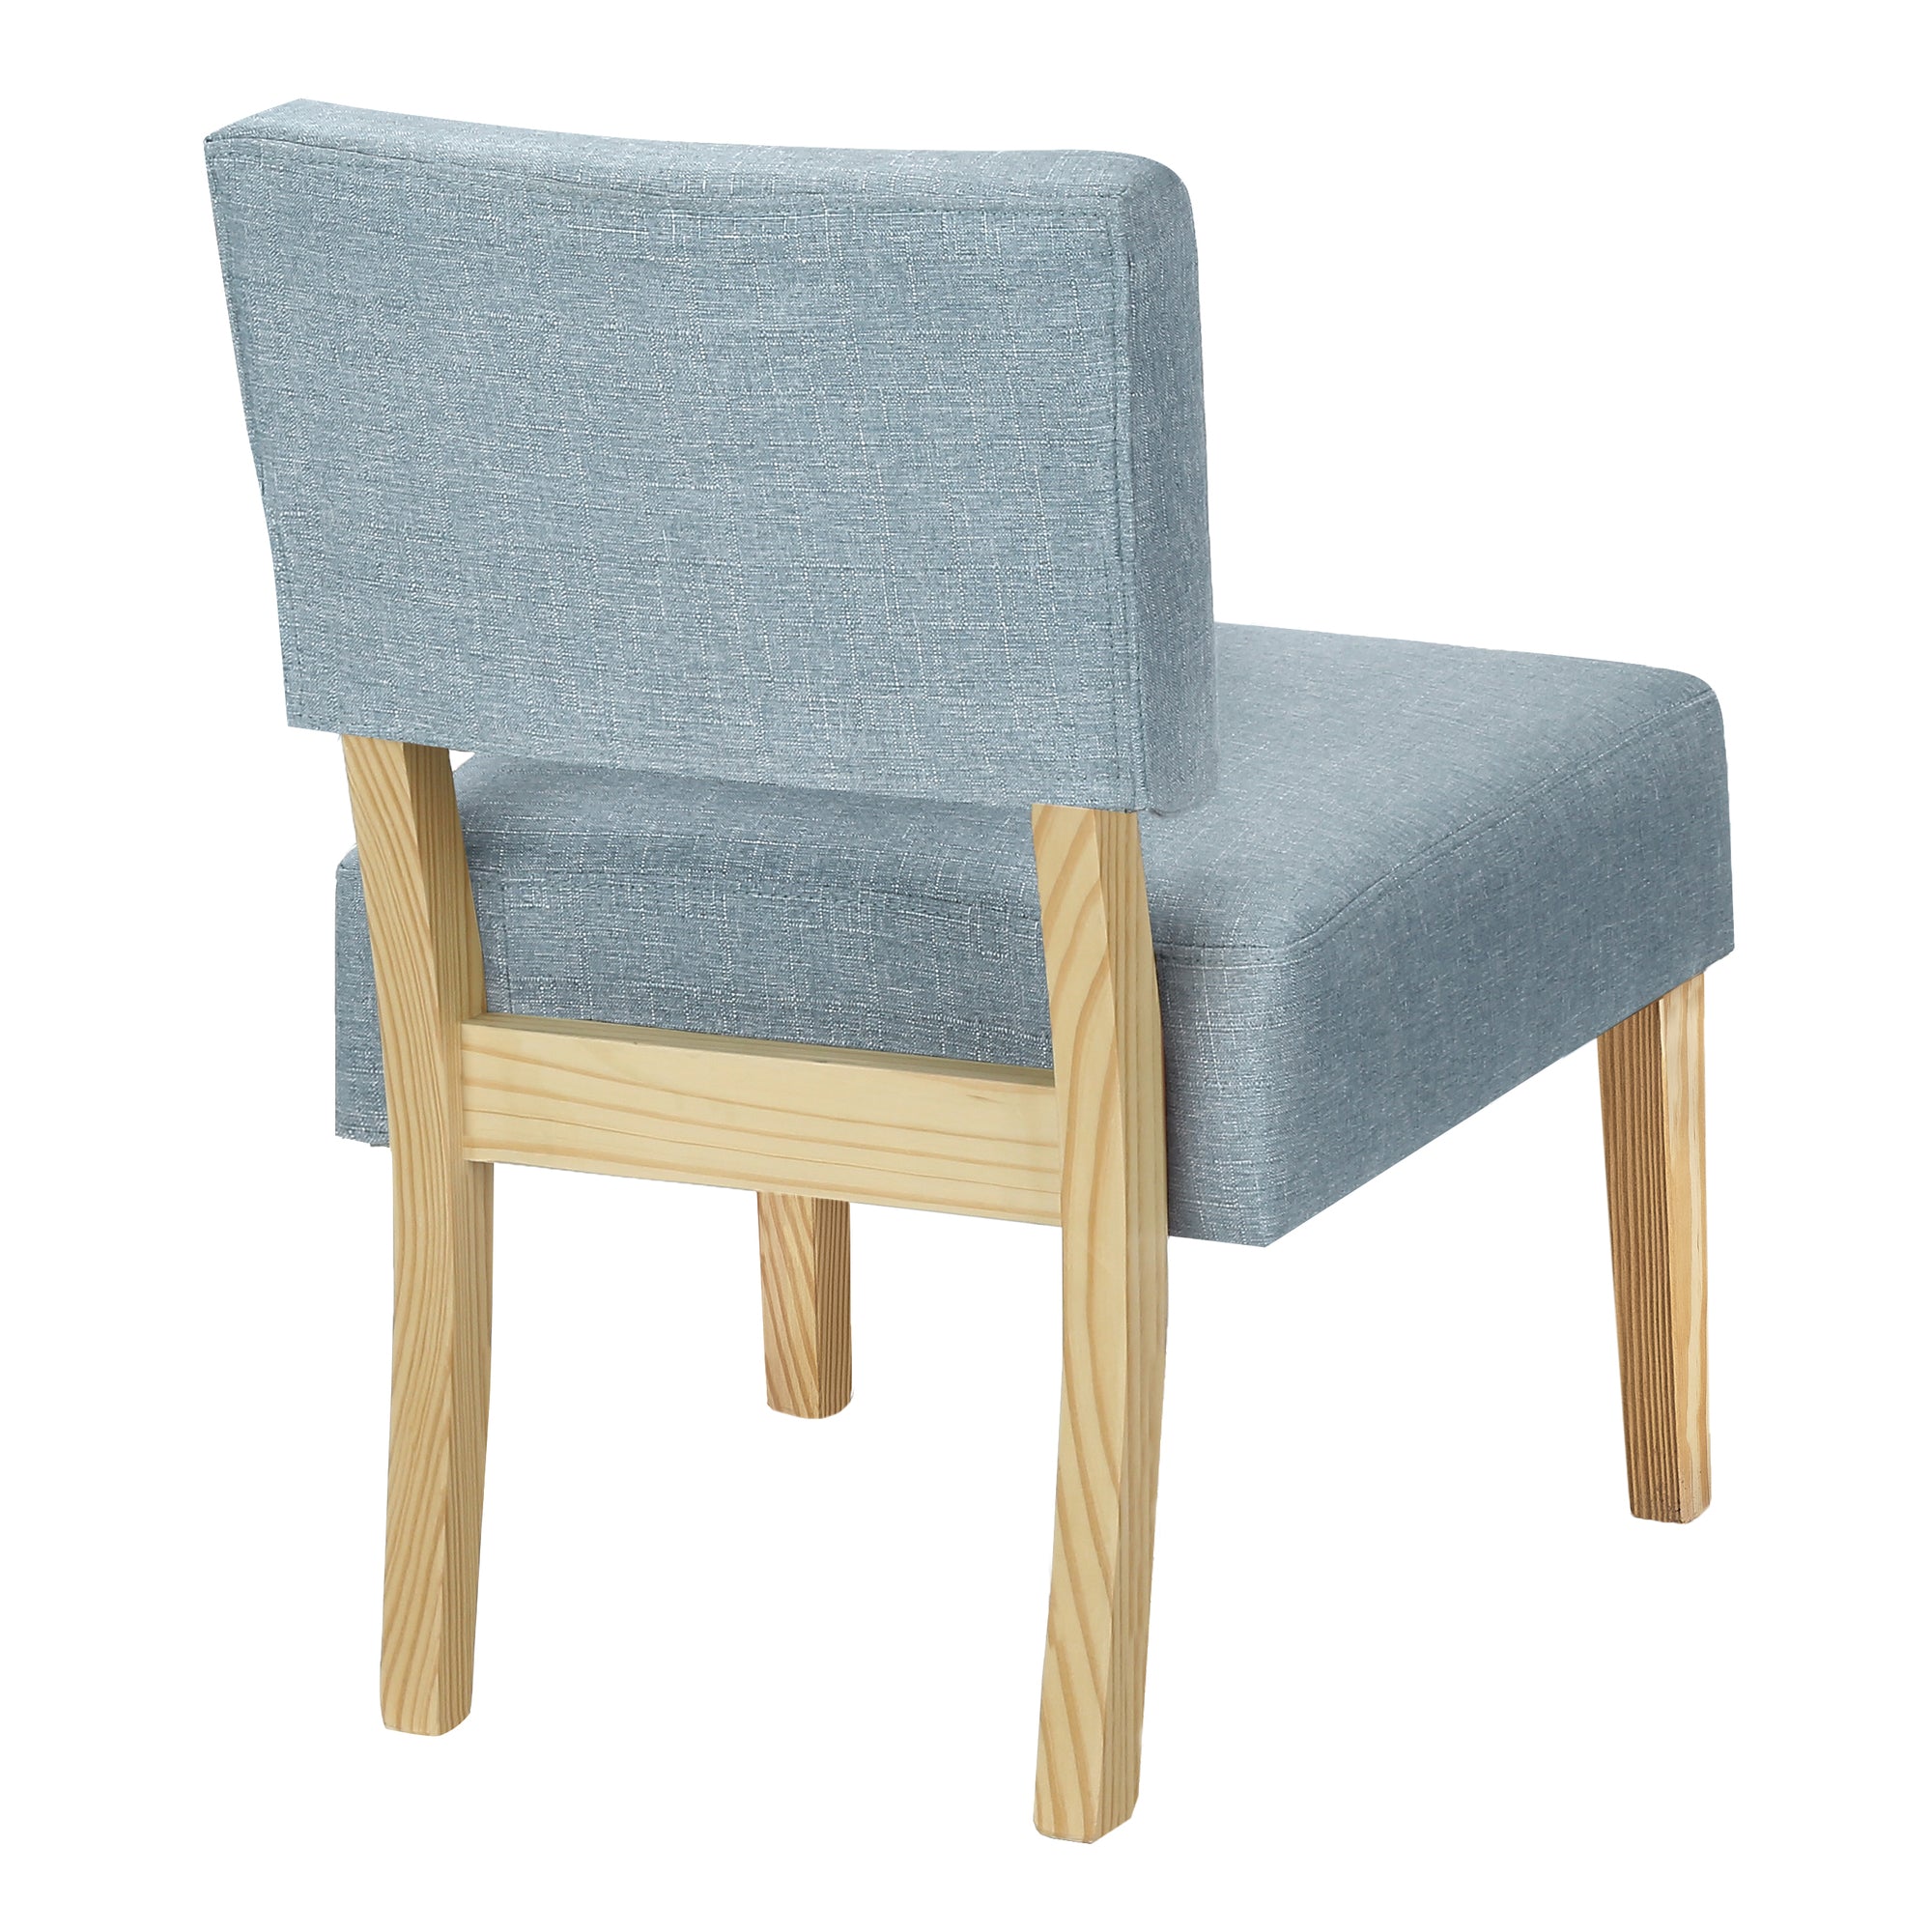 Accent Chair - Light Blue Fabric / Natural Wood Legs